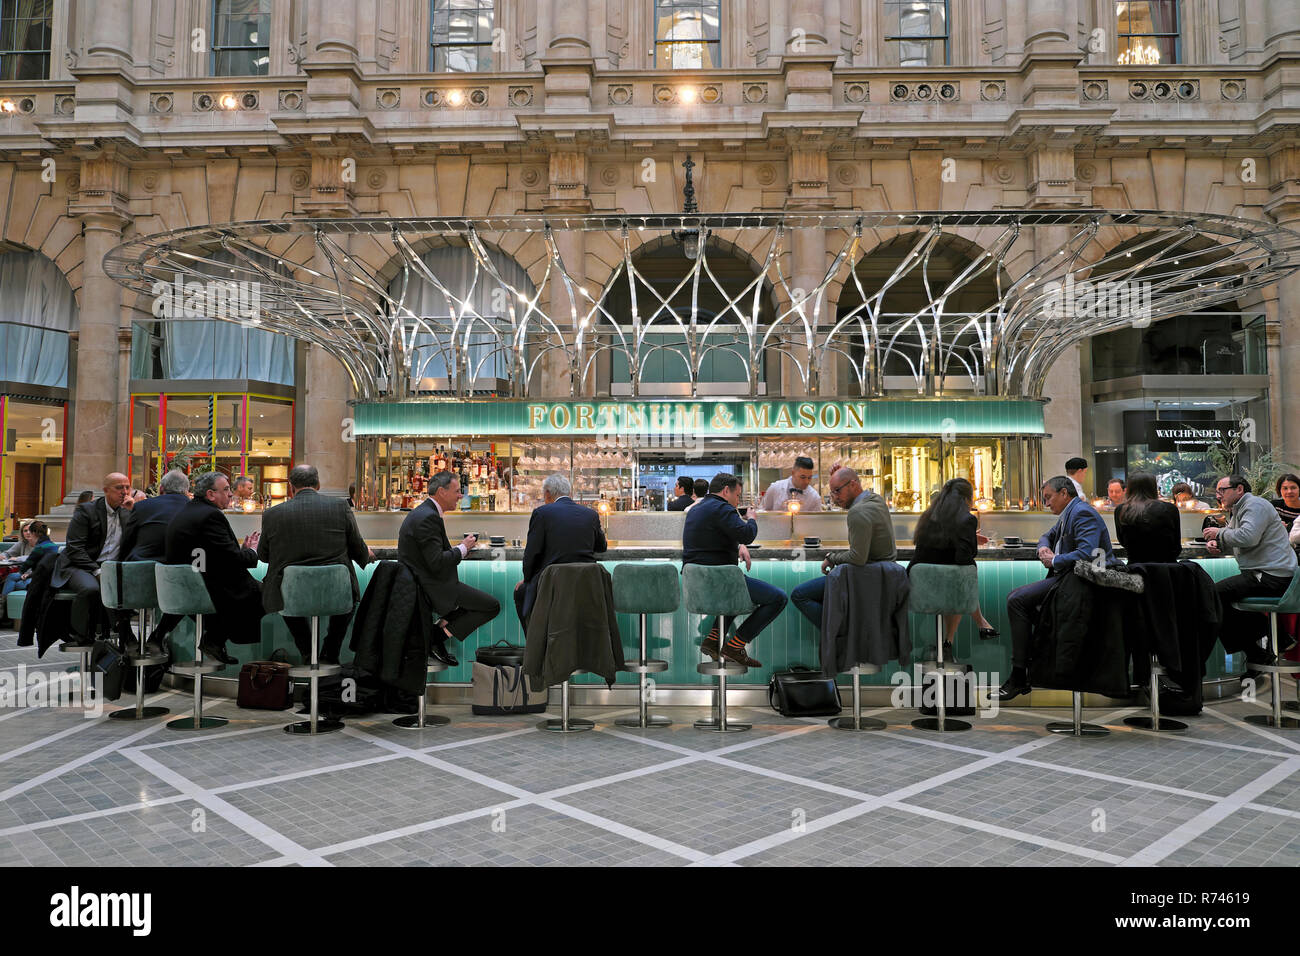 Fortnum & Mason sign and customers at the bar restaurant inside the Royal Exchange in the City of London during Christmas in England UK  KATHY DEWITT Stock Photo